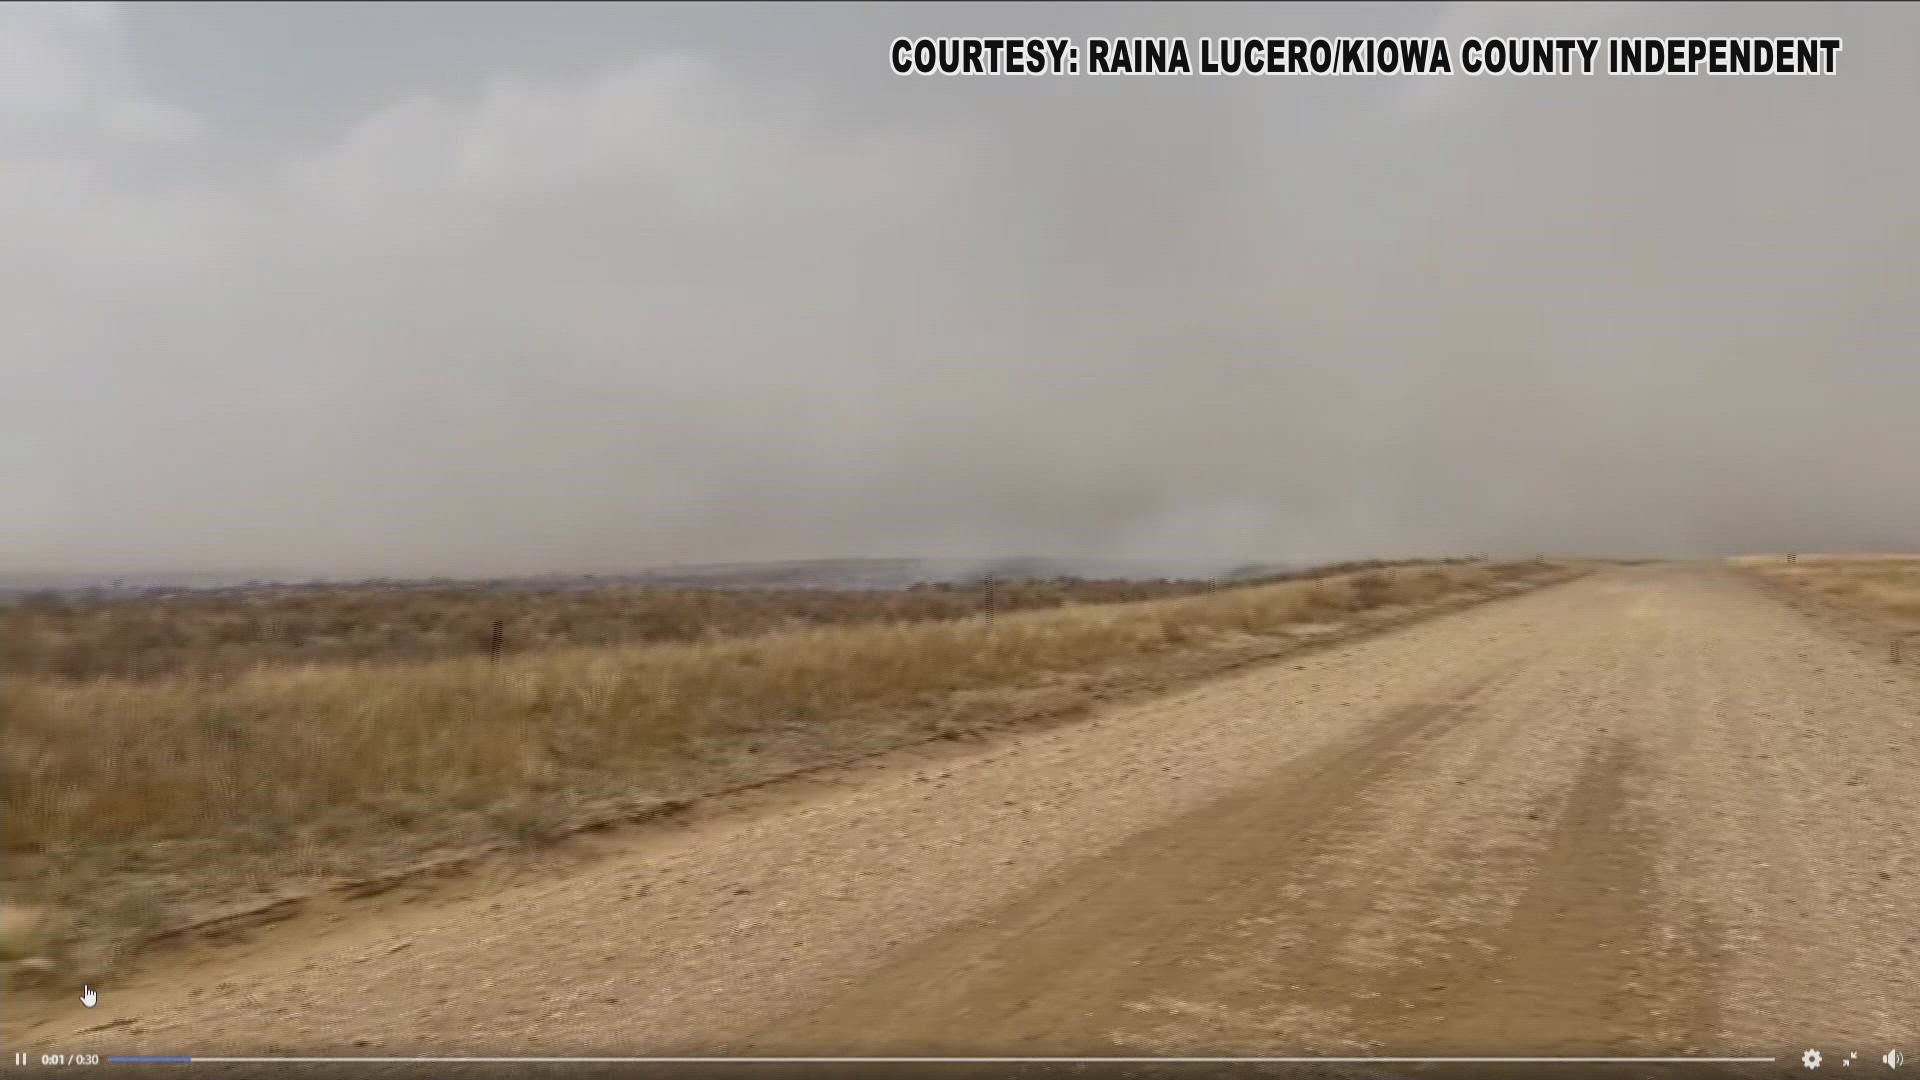 Officials ordered evacuations for residents in the Chivington and Brandon communities in Kiowa County.